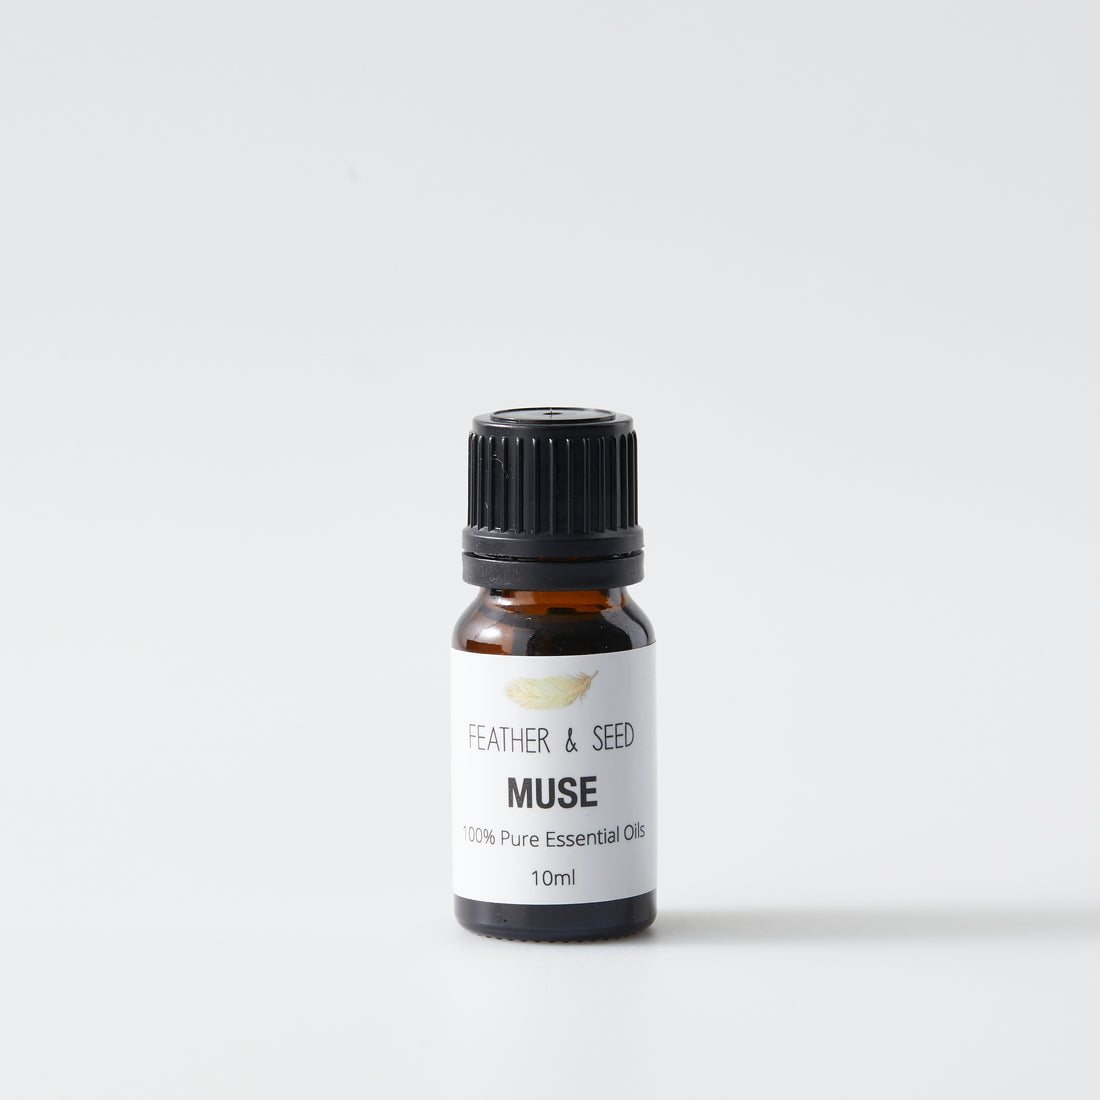 Feather & Seed Muse 100% pure essential oils